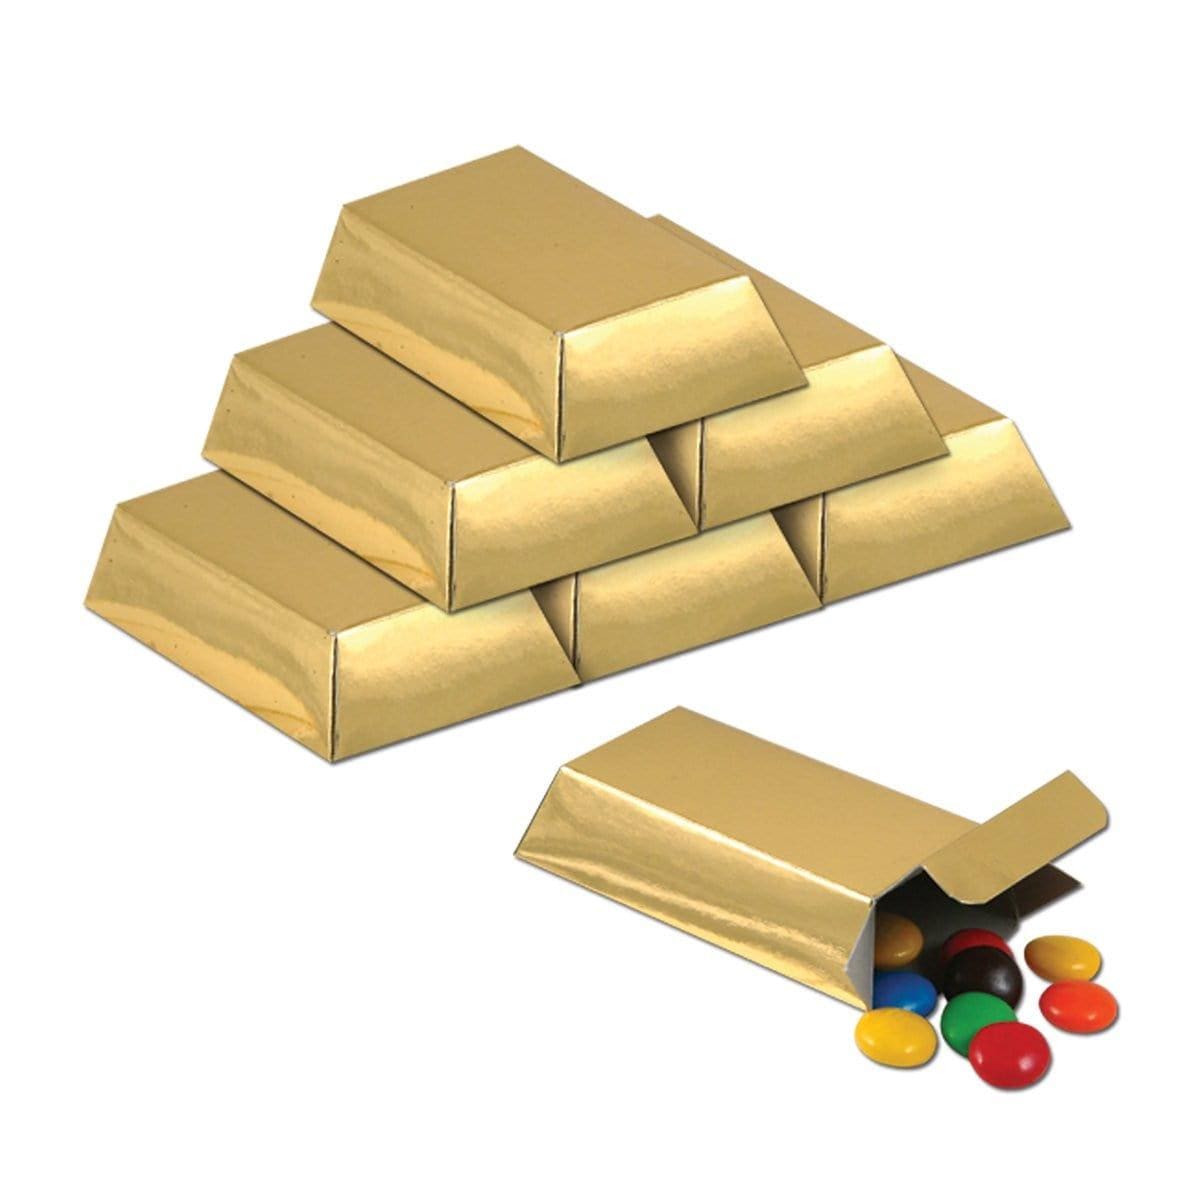 Buy Theme Party Gold Bar Favor Boxes, 12 per Package sold at Party Expert